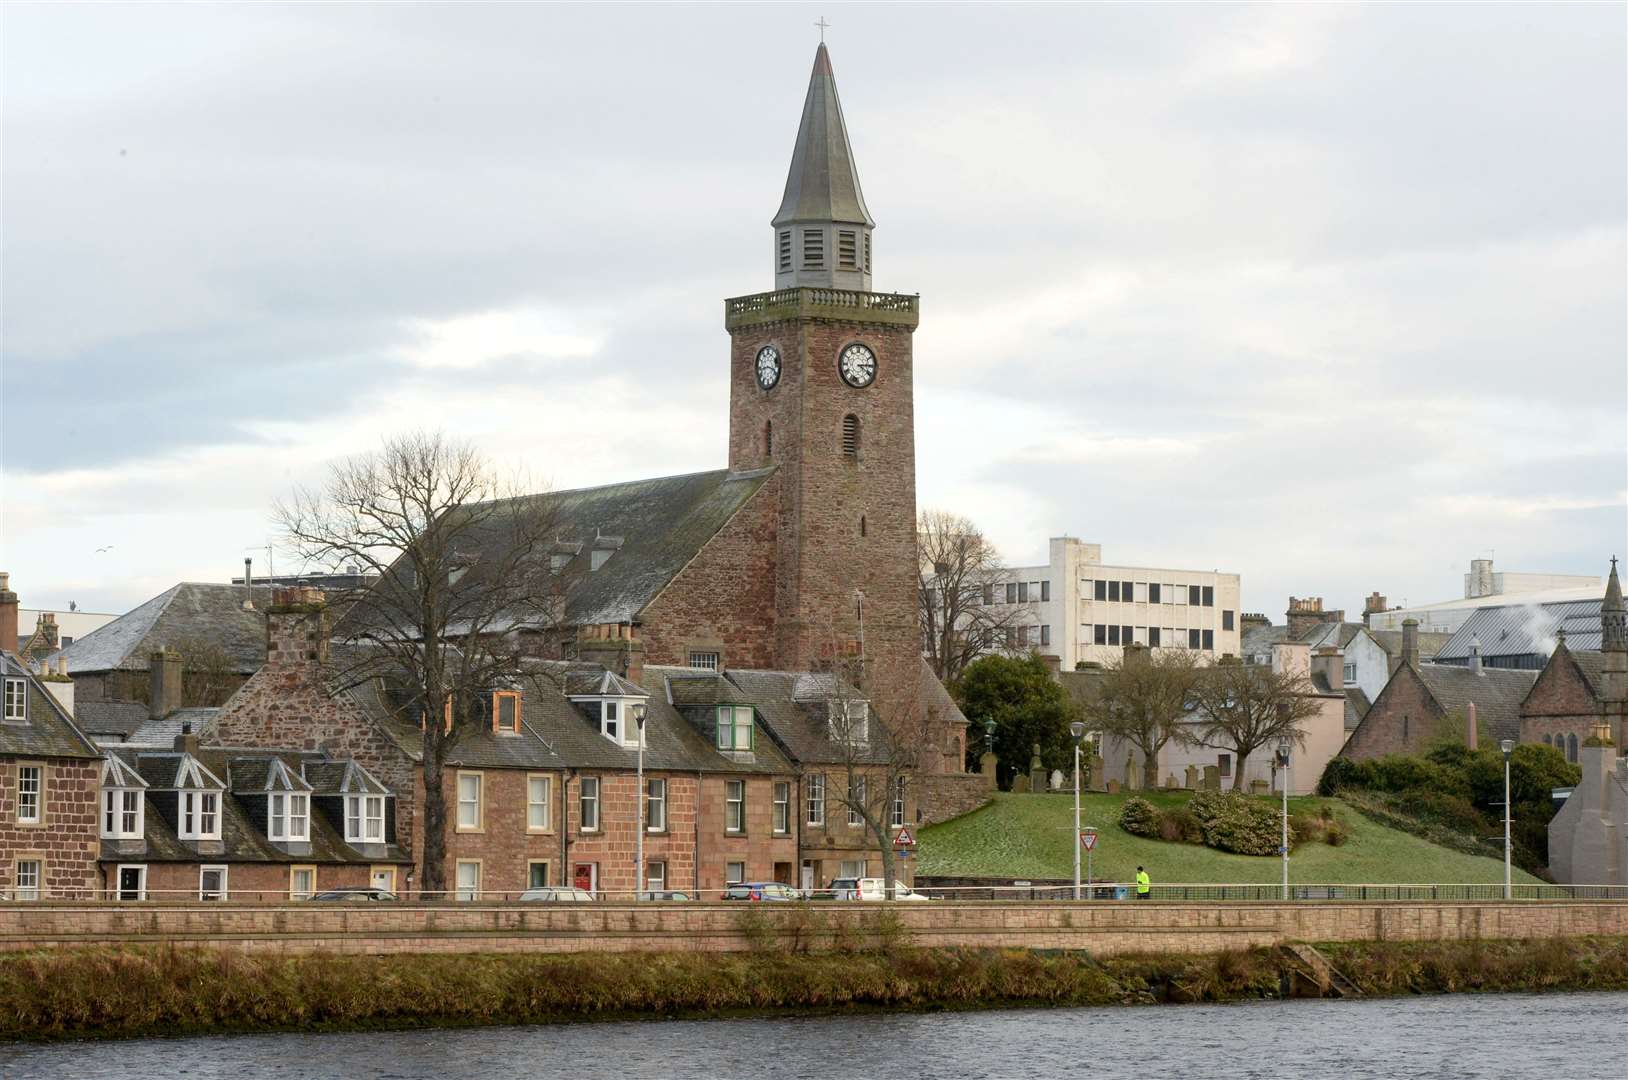 The Old High Church, overlooking the River Ness, is the oldest building in Inverness.